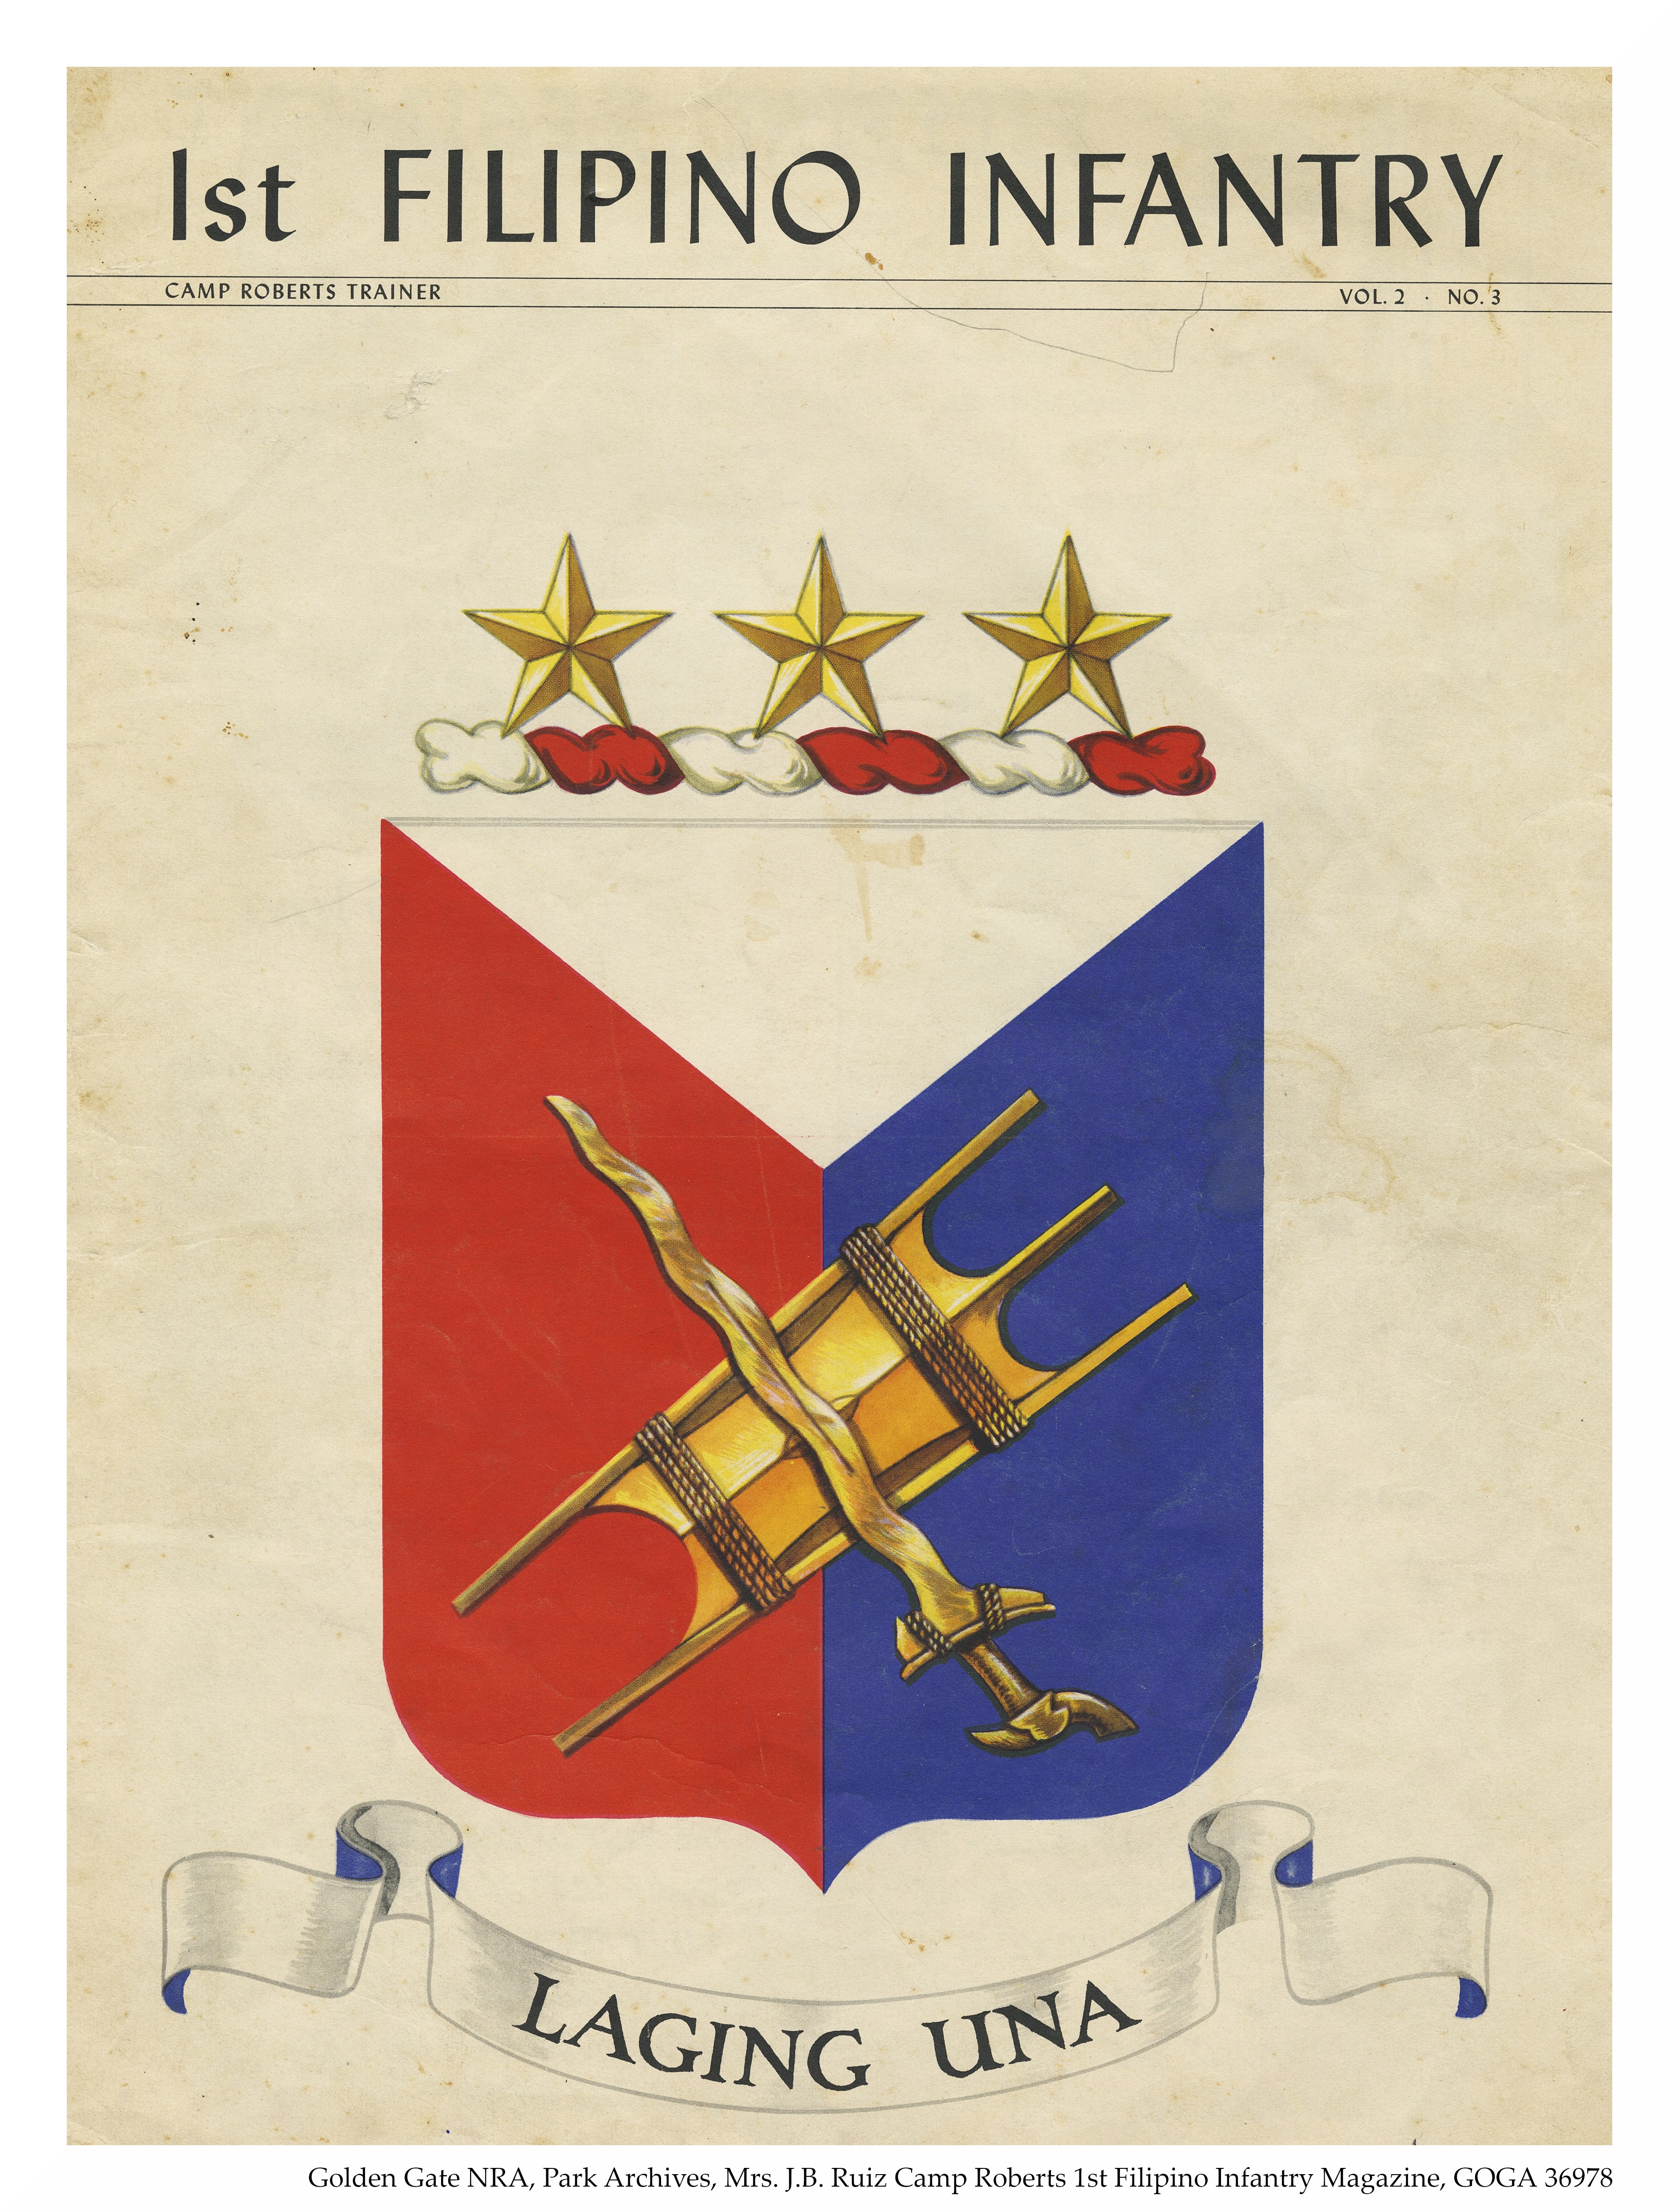 The crest of the Filipino American Infantry 